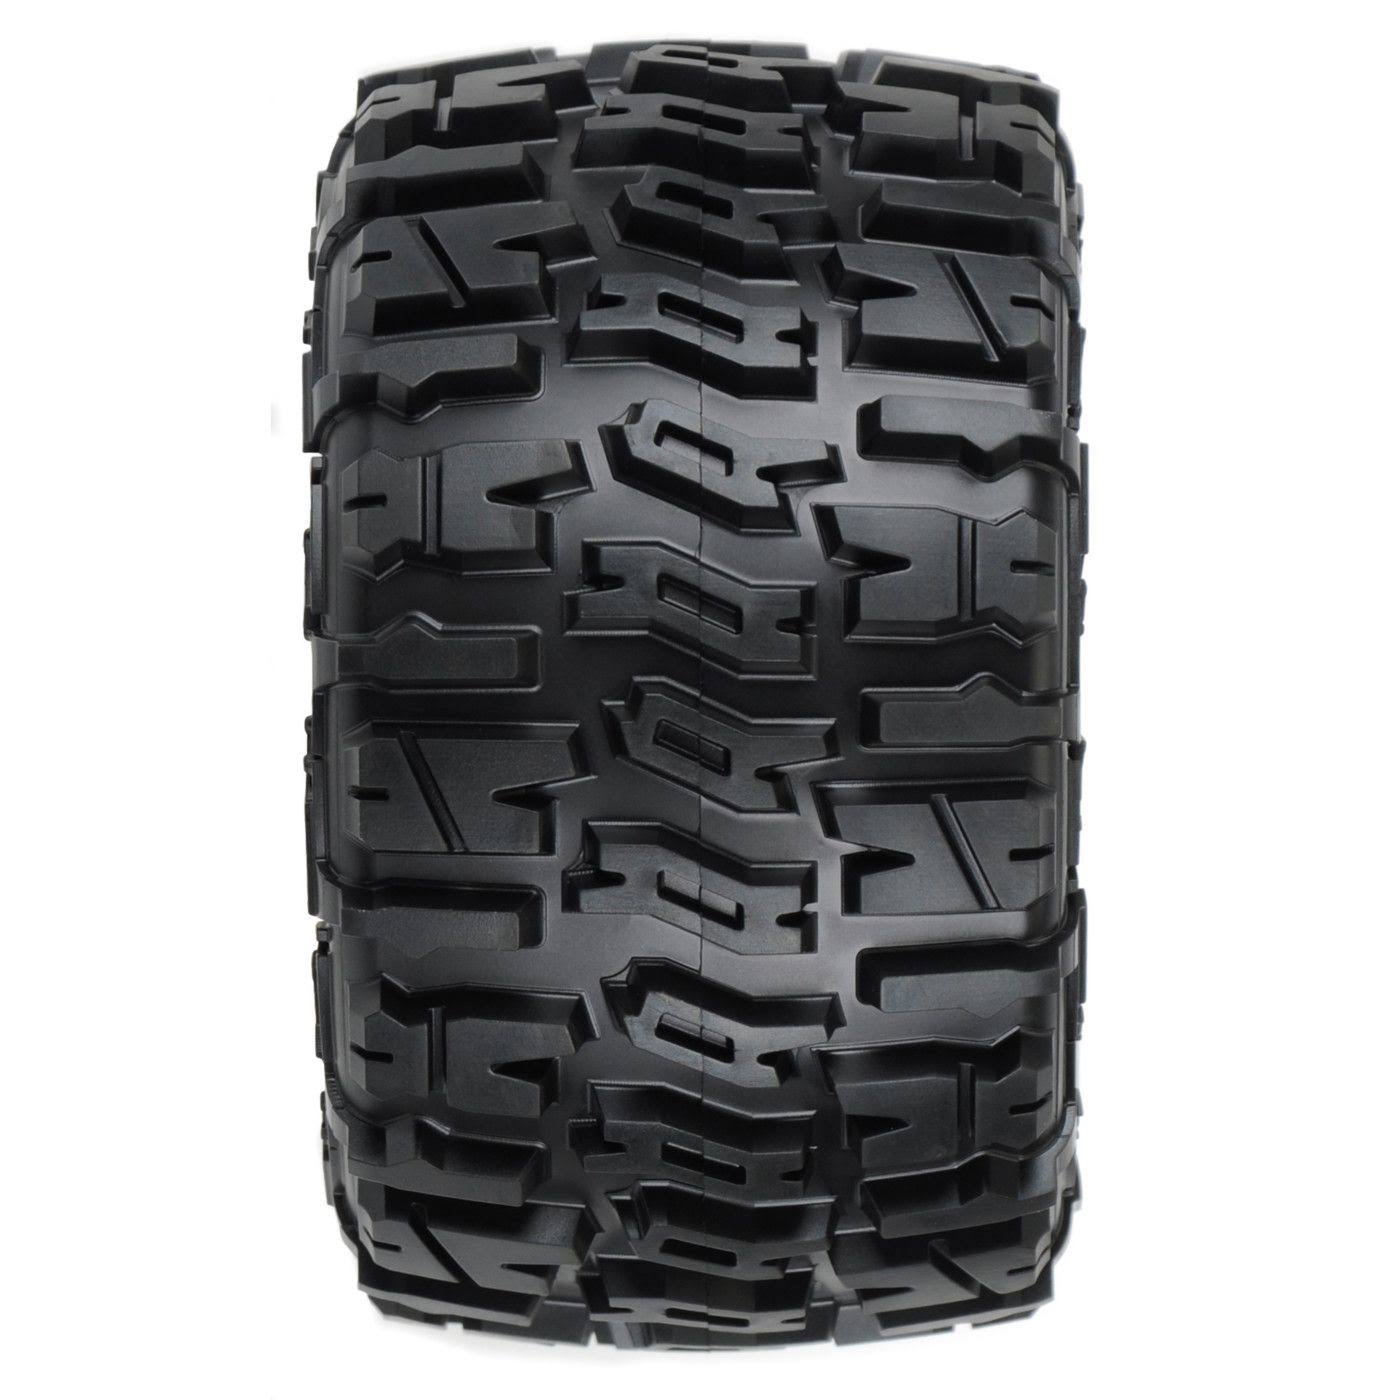 Traxxas Trencher Style Bead All Terrain Truck Tires - 2.8"